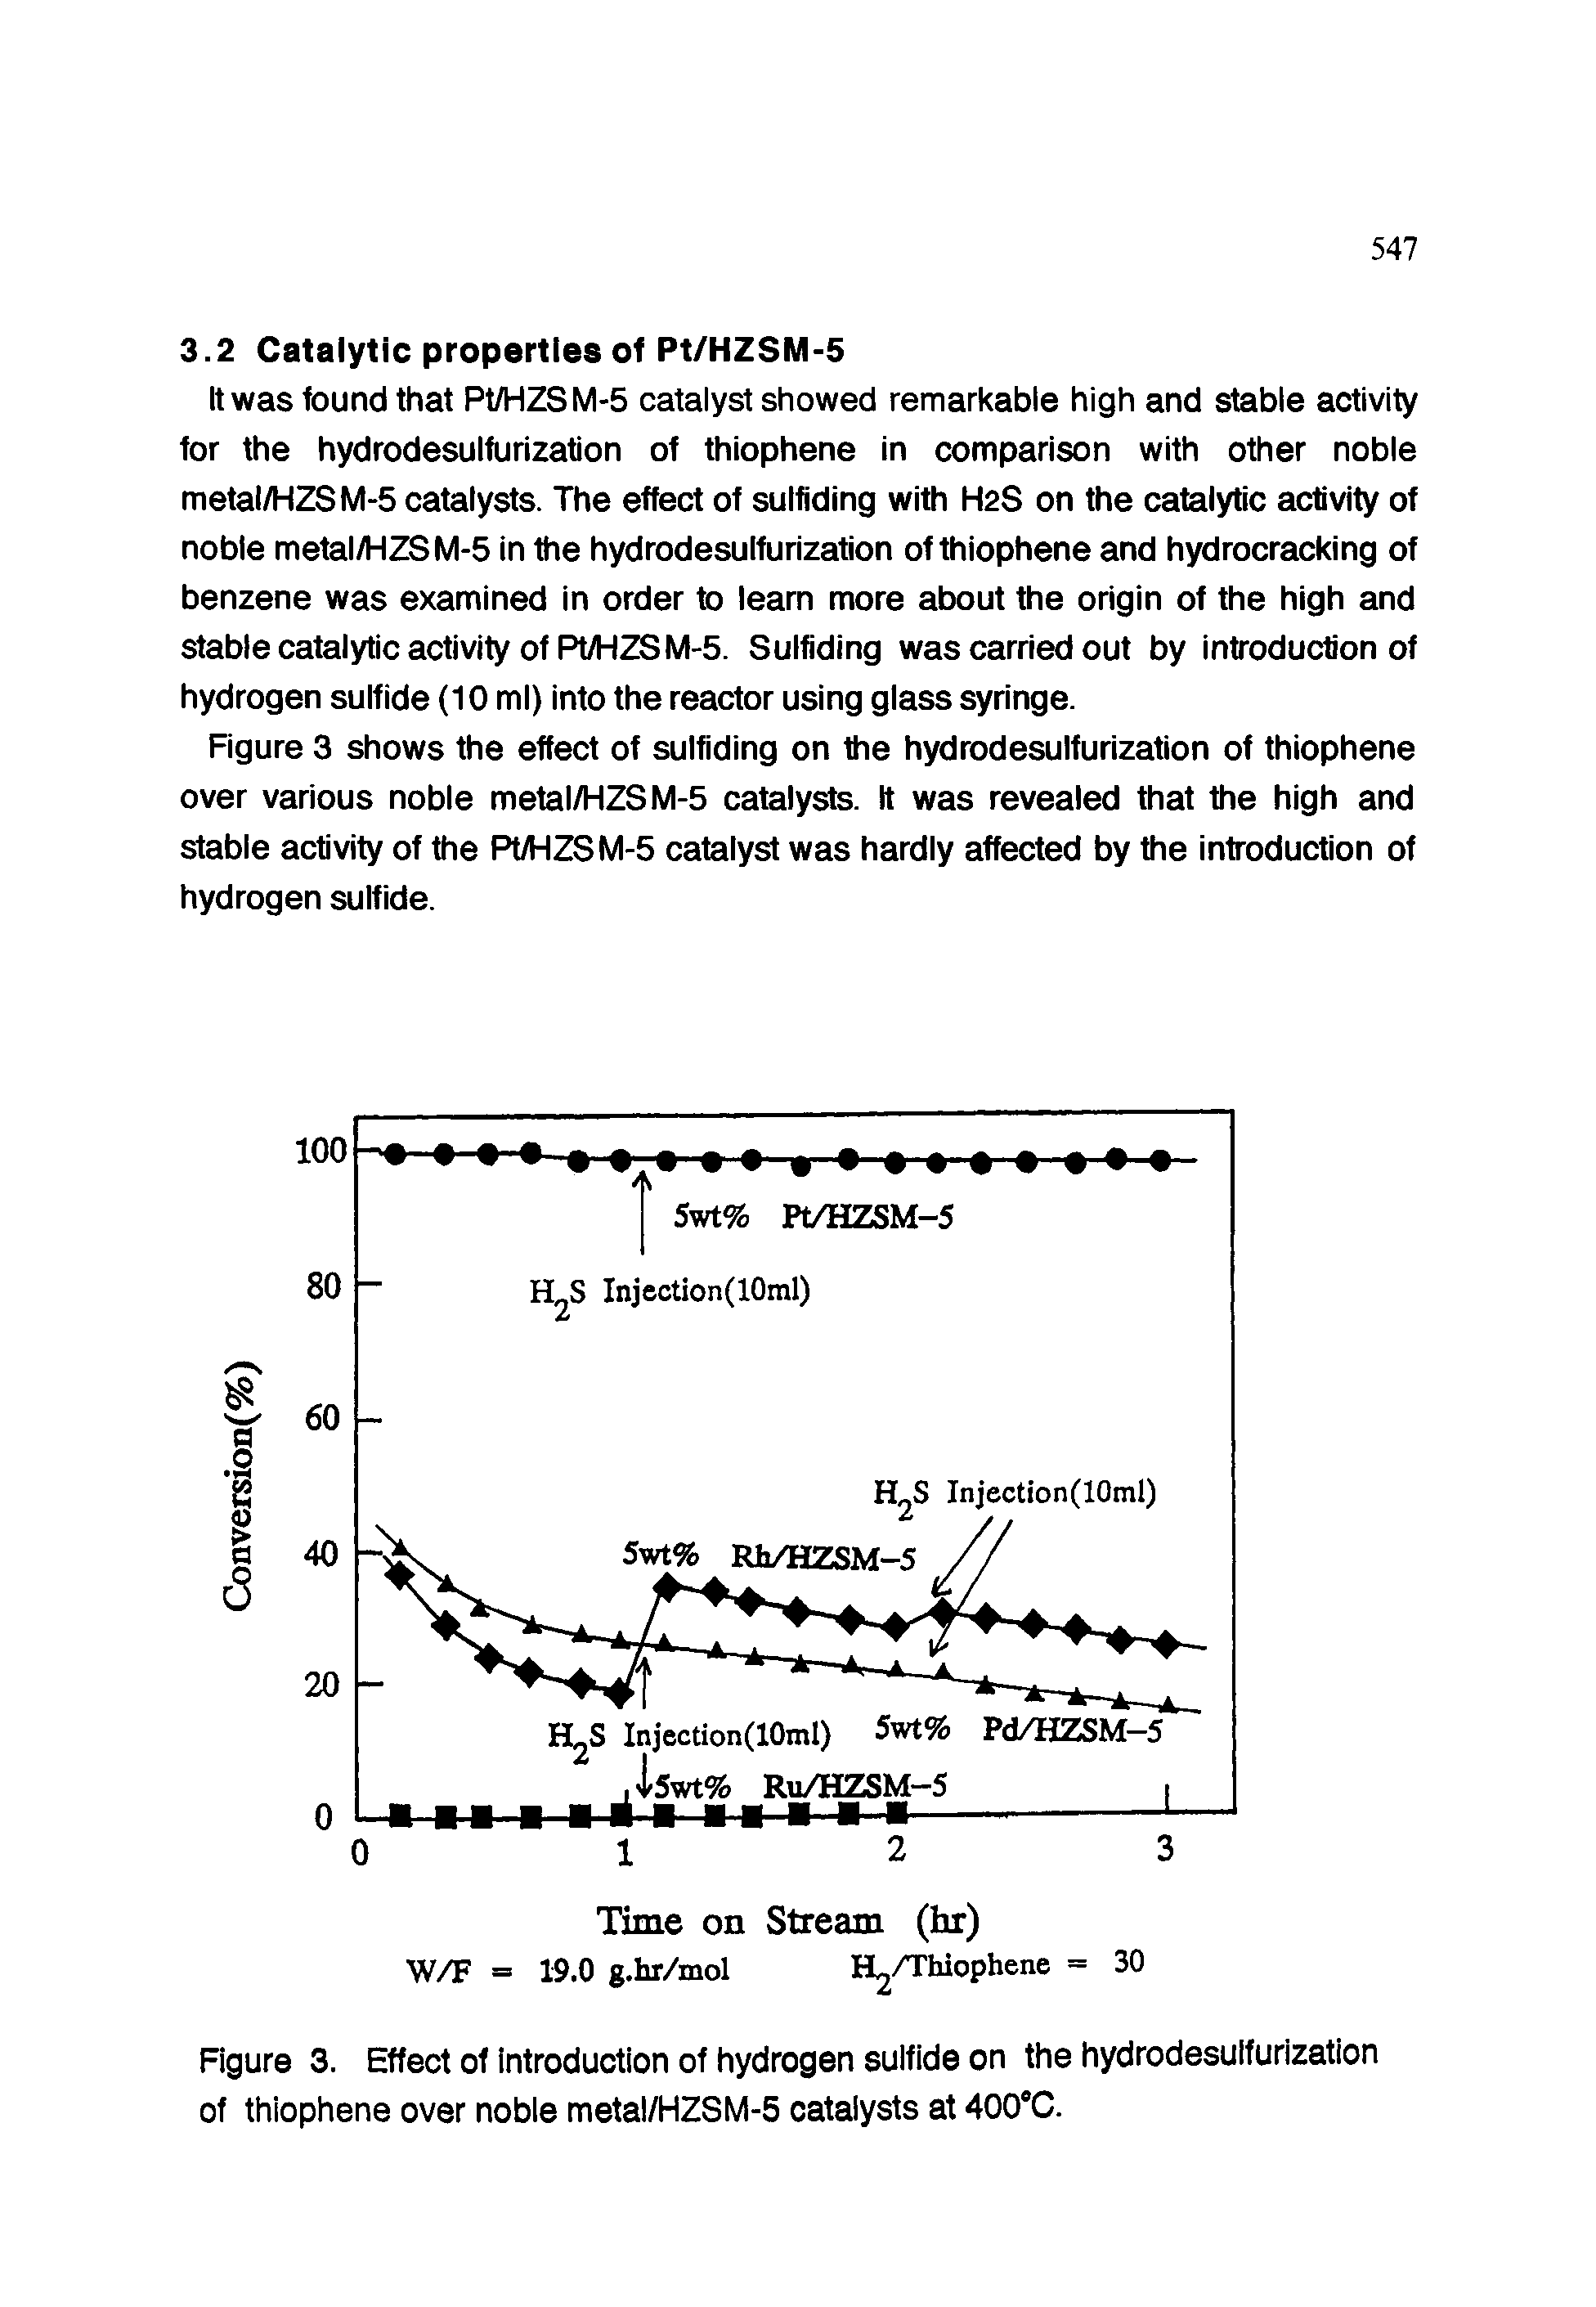 Figure 3. Effect of introduction of hydrogen sulfide on the hydrodesulfurization of thiophene over nobie metal/HZSM-5 catalysts at 400 C.